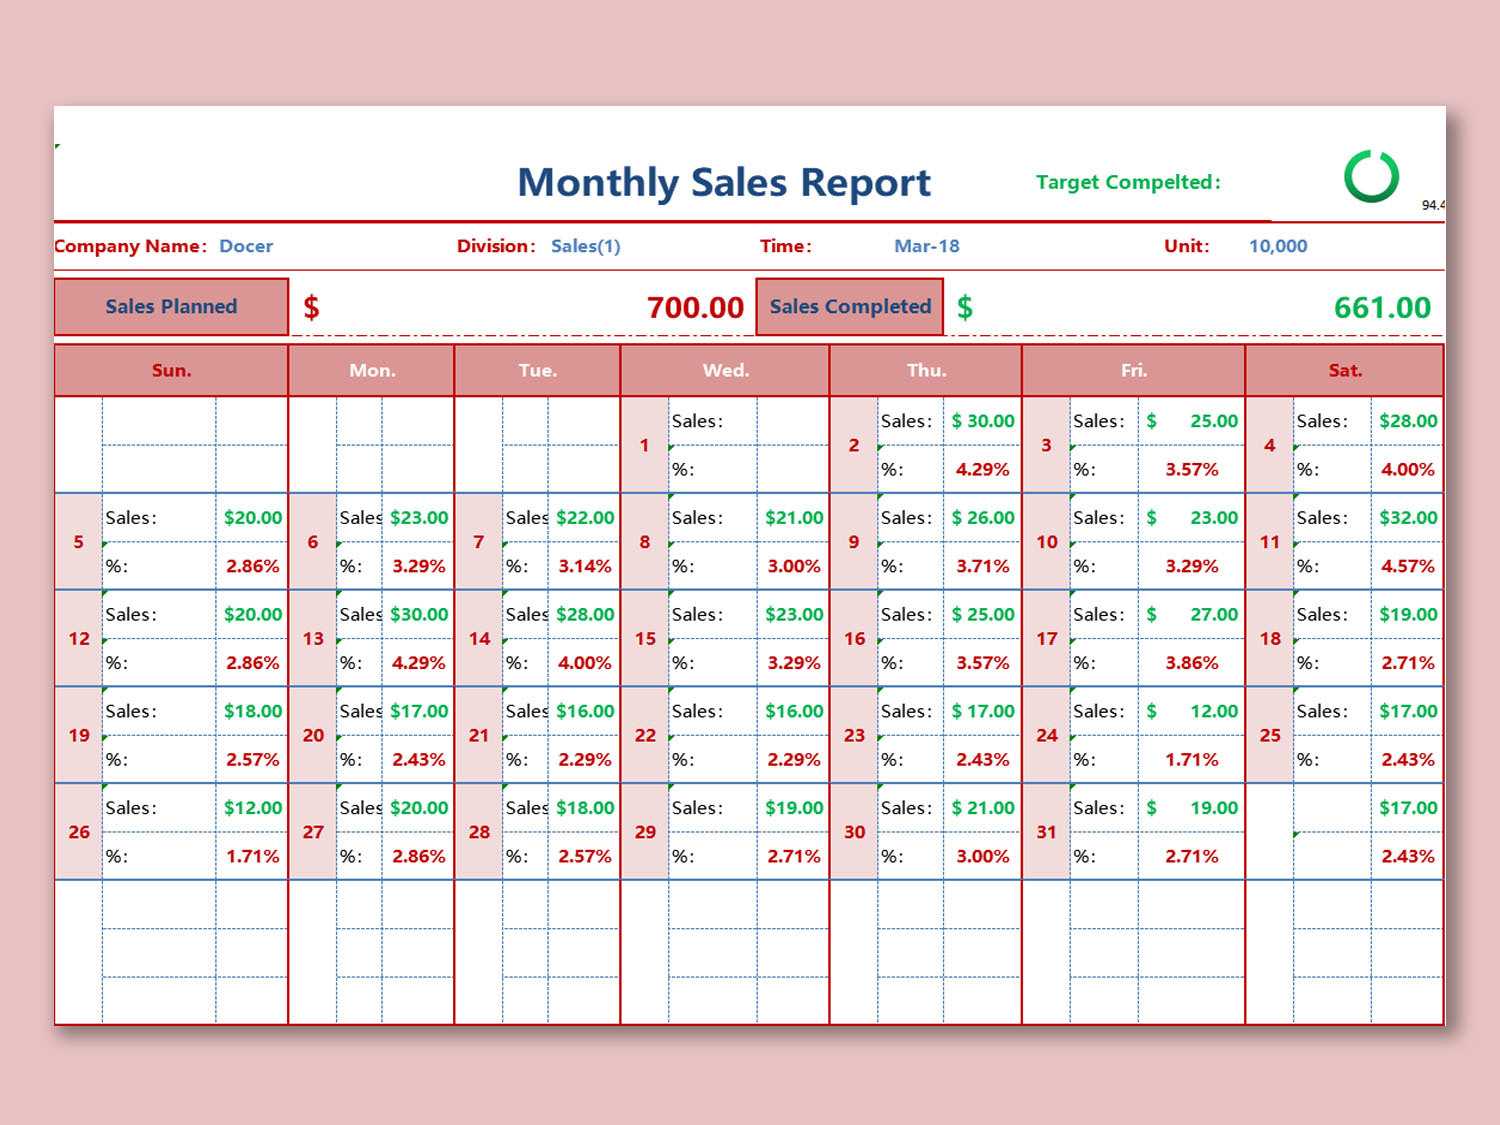 Wps Template - Free Download Writer, Presentation For Sale Report Template Excel